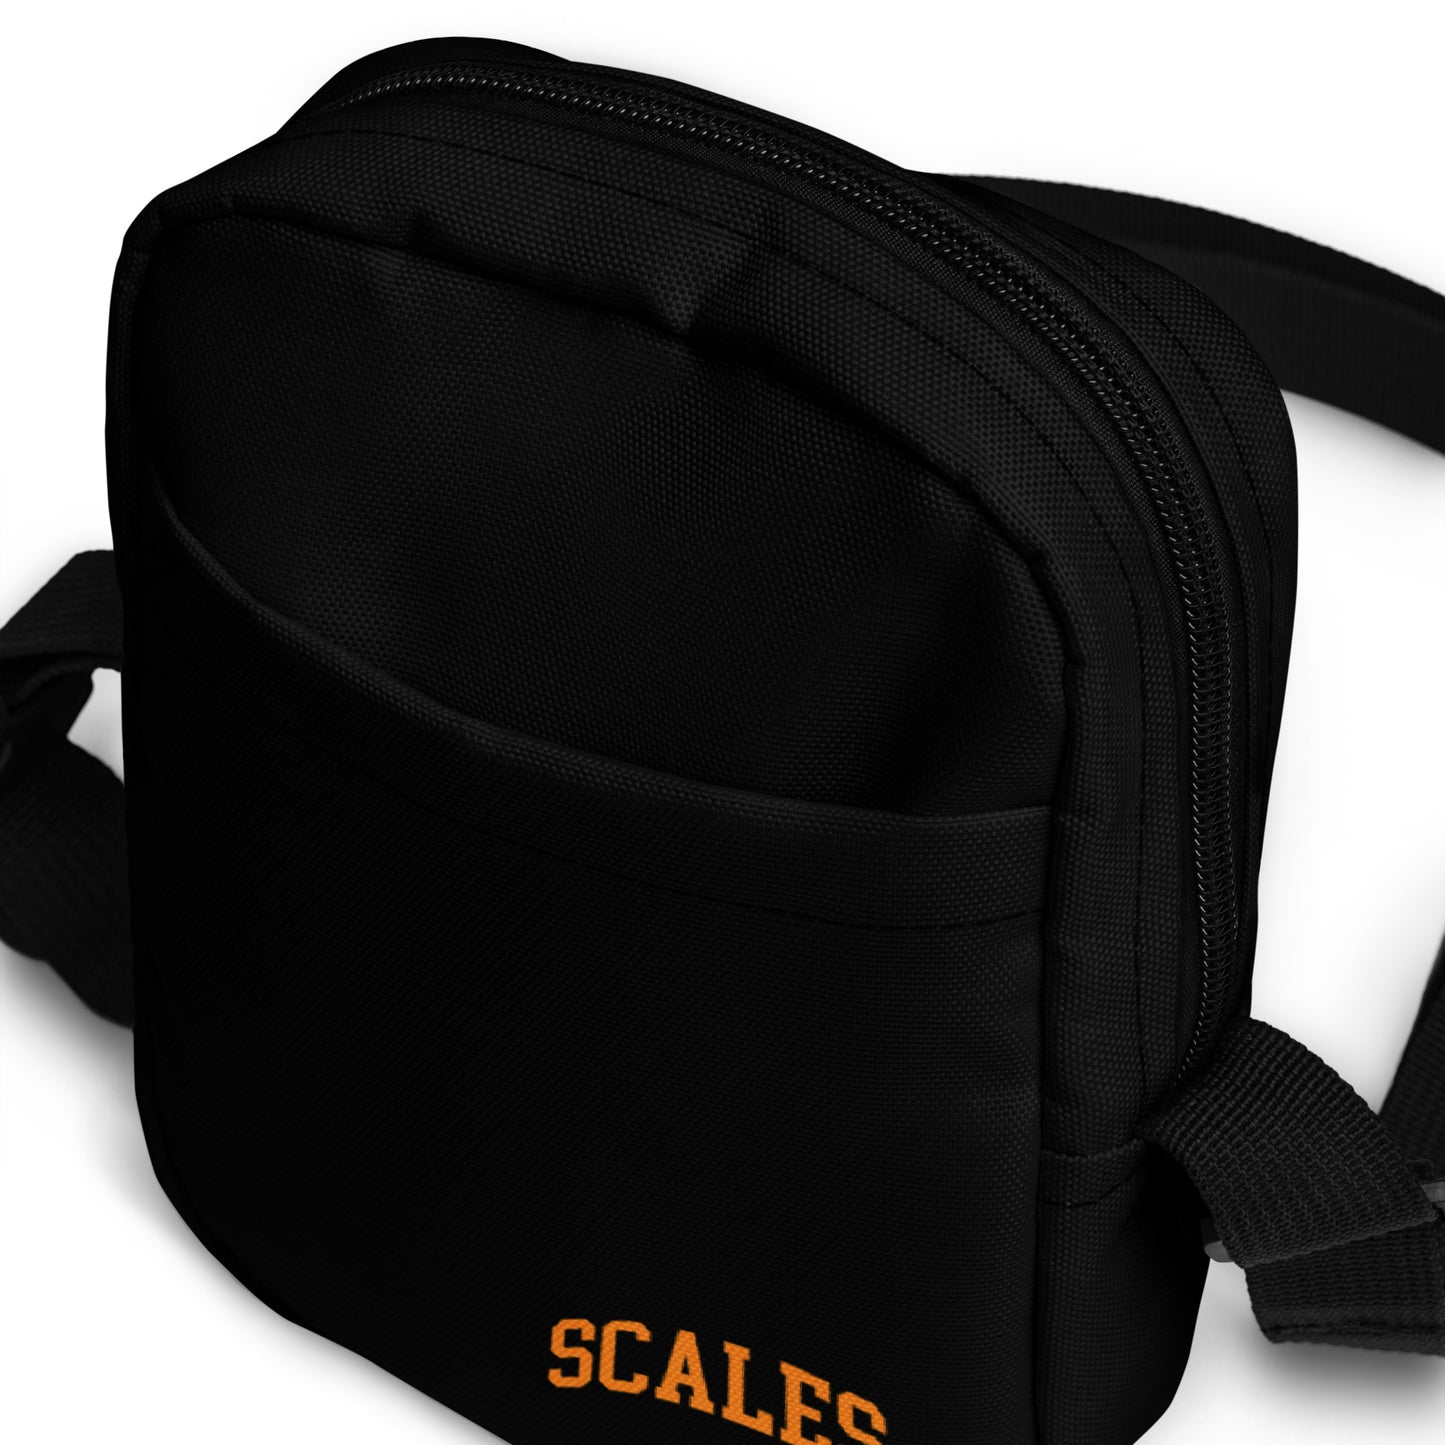 Scales Utility bag